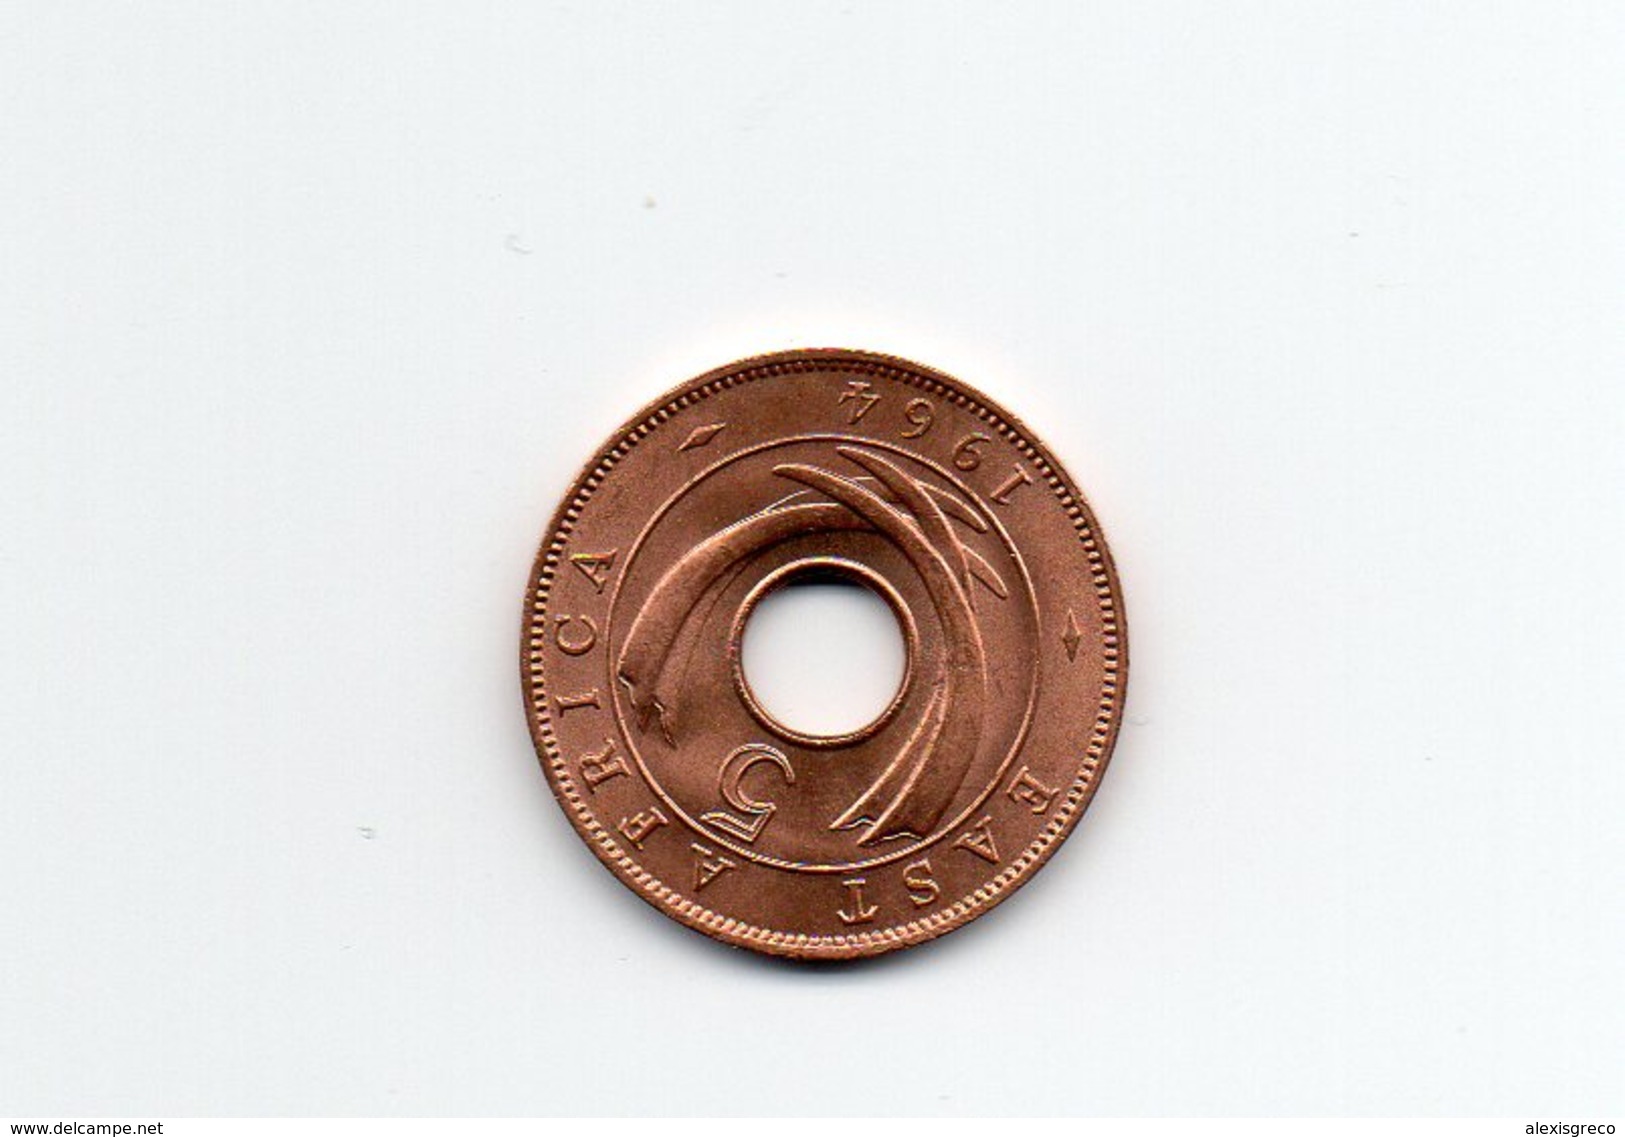 BRITISH EAST AFRICA 1964 UNCIRCULATED COIN FIVE CENTS BRONZE (Post-Independence Issue). - Colonie Britannique